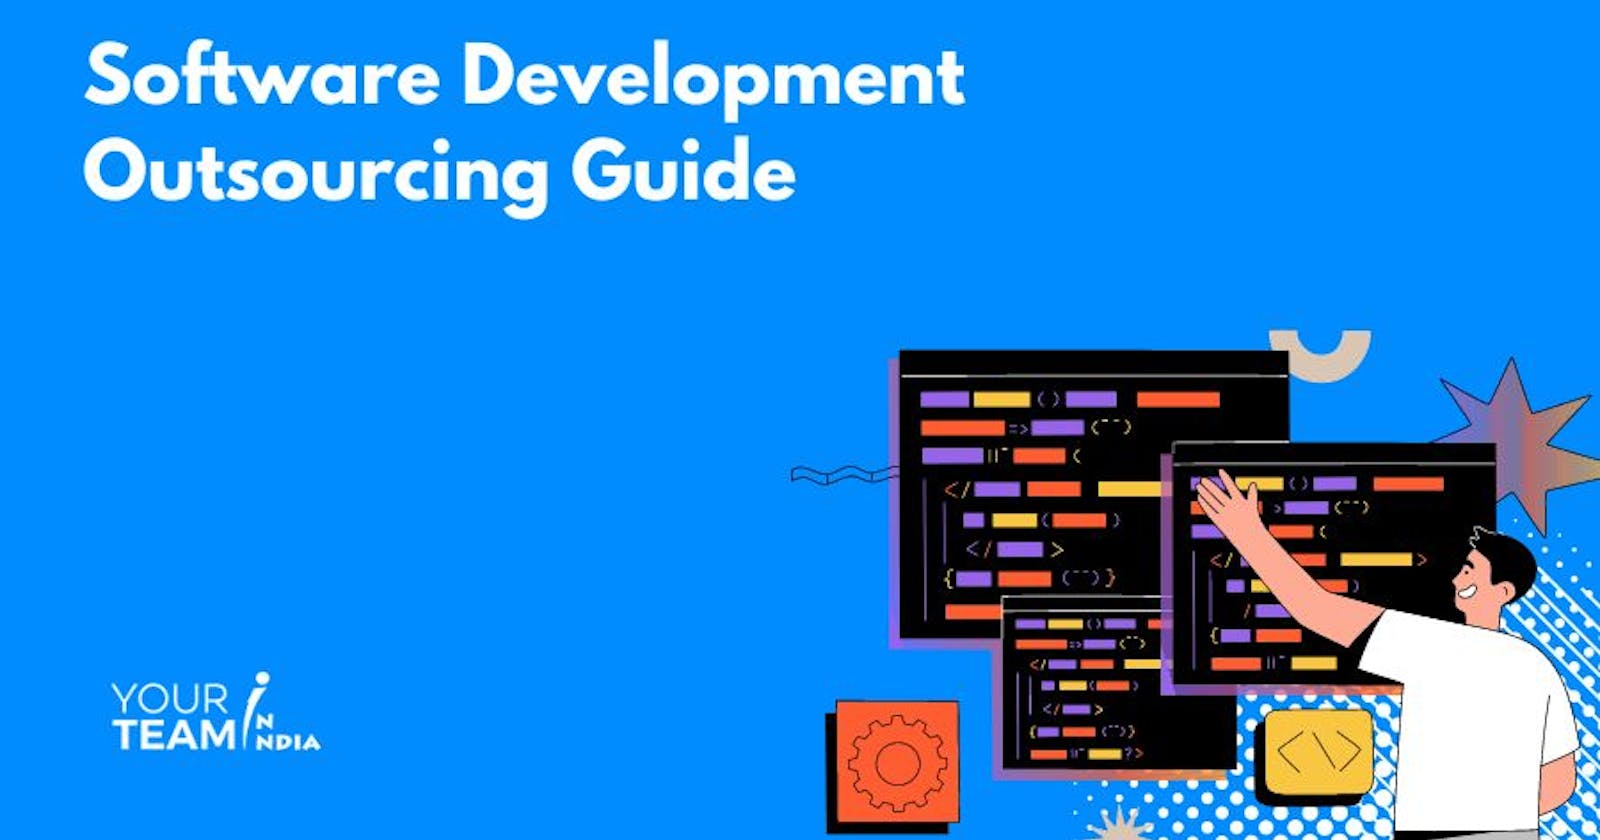 The All-In-One Guide to Software Development Outsourcing